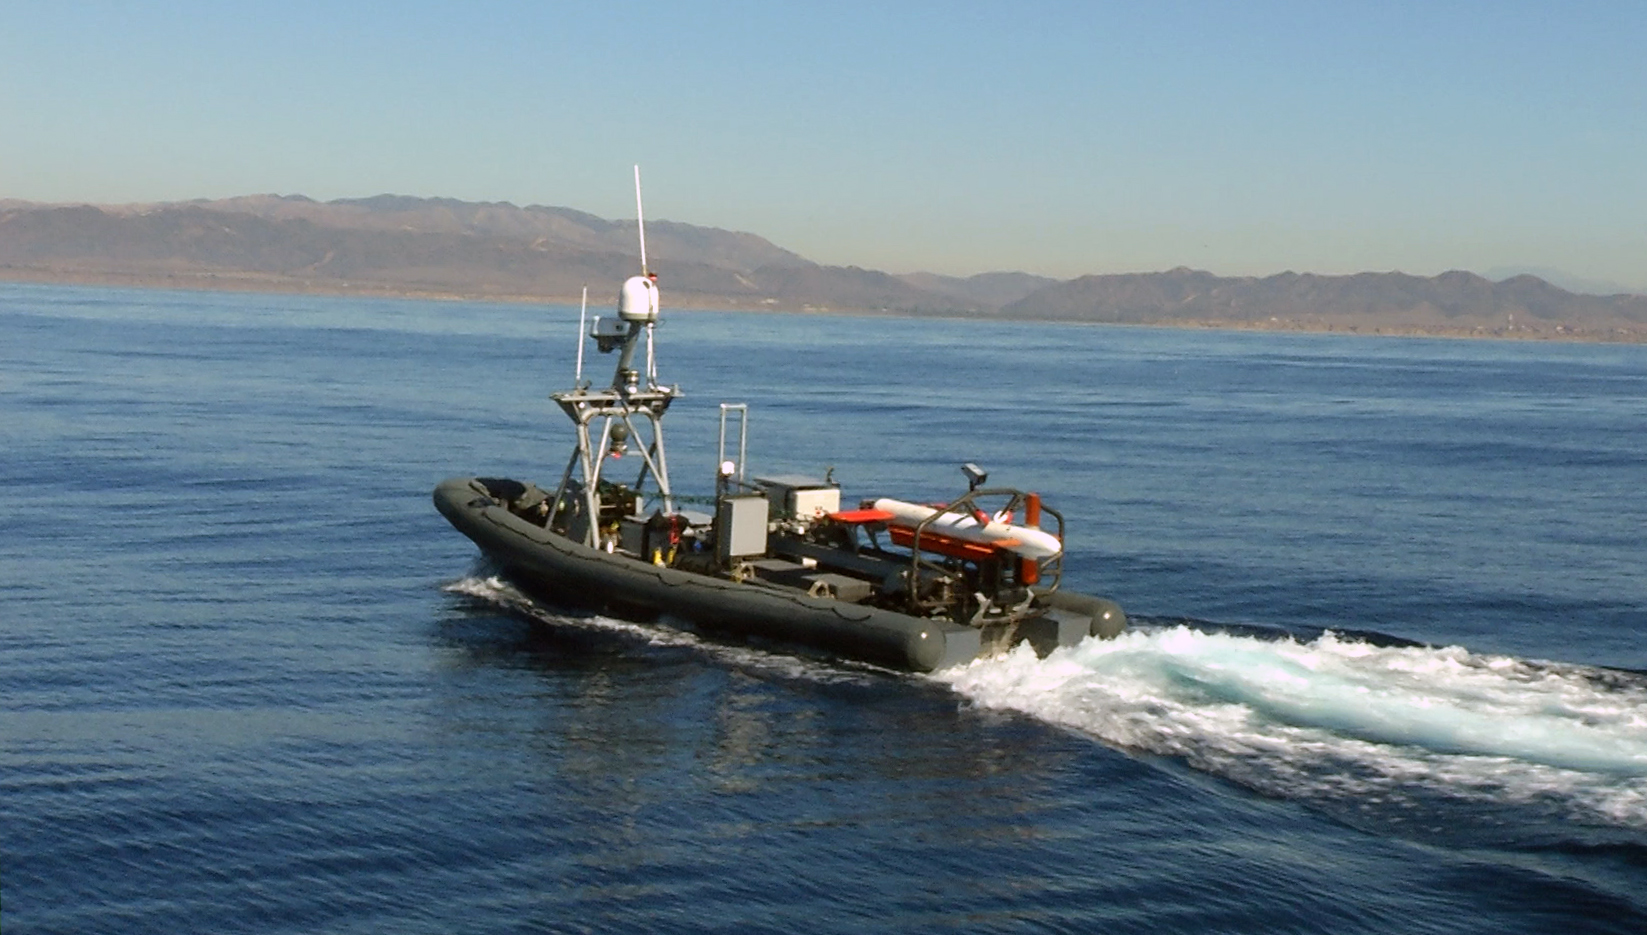 Mine Hunting Unmanned Surface Vehicle (MHU)